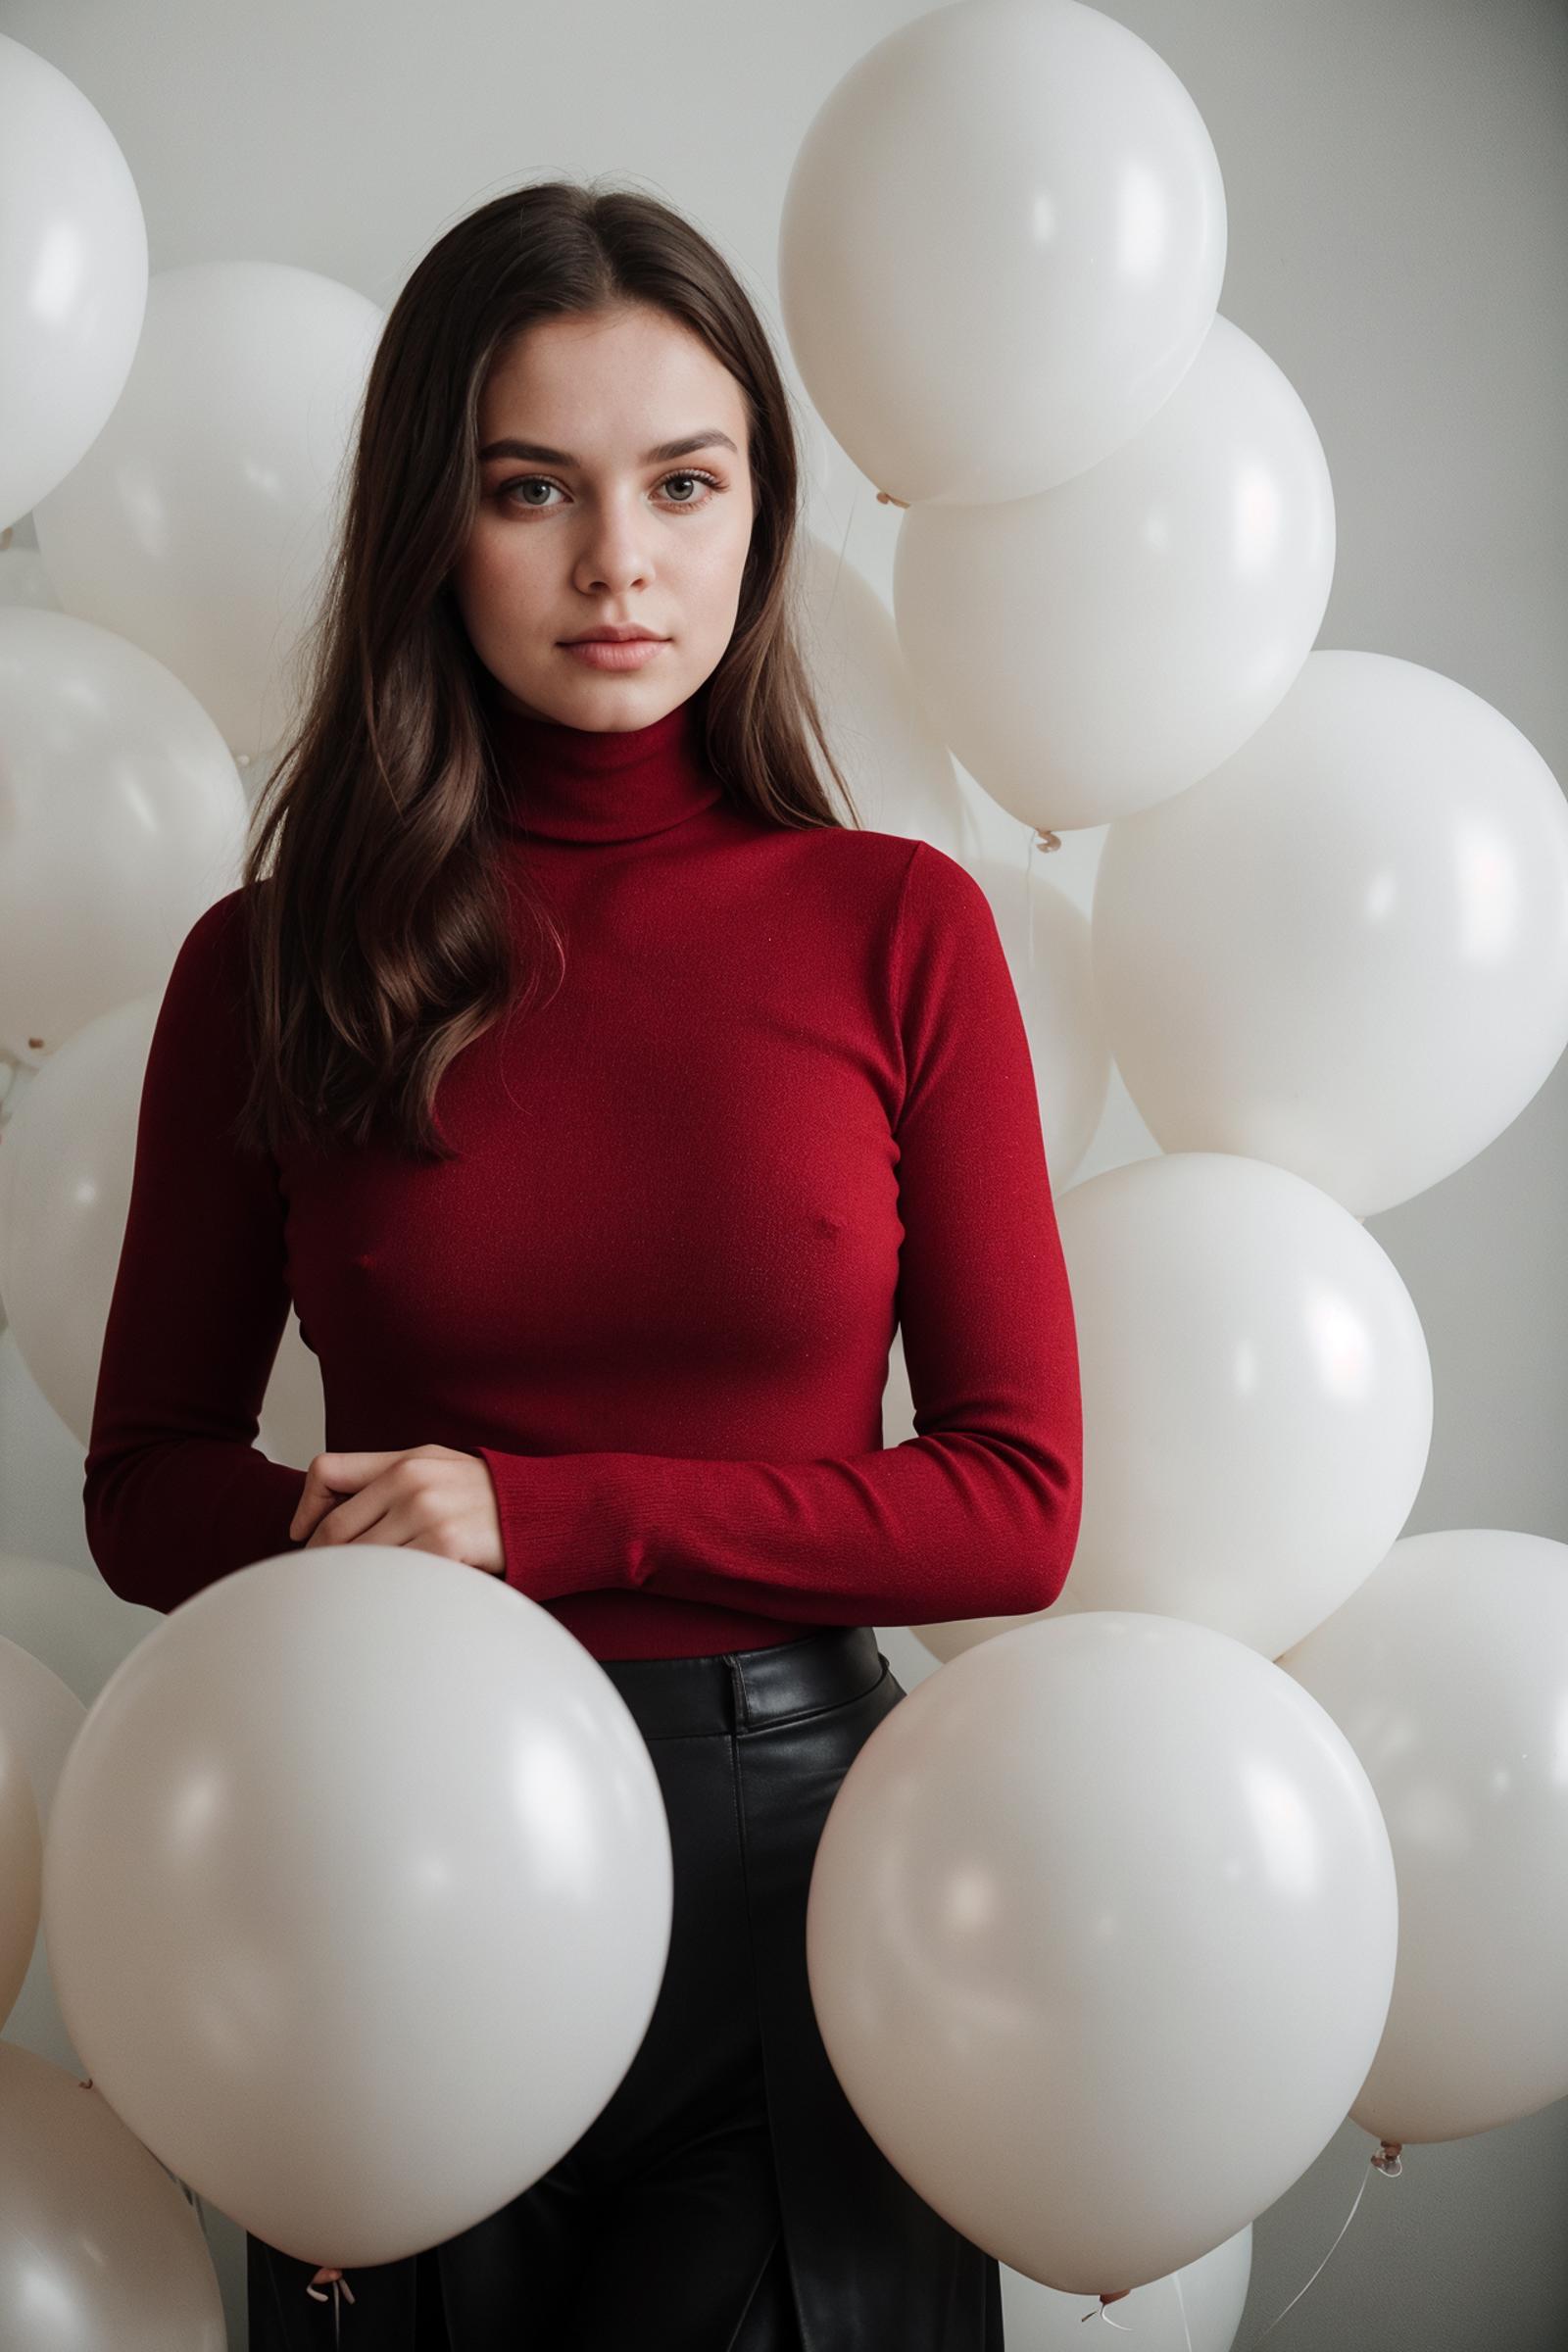 A young woman wearing a red top and black leather pants stands in front of a wall of white balloons.